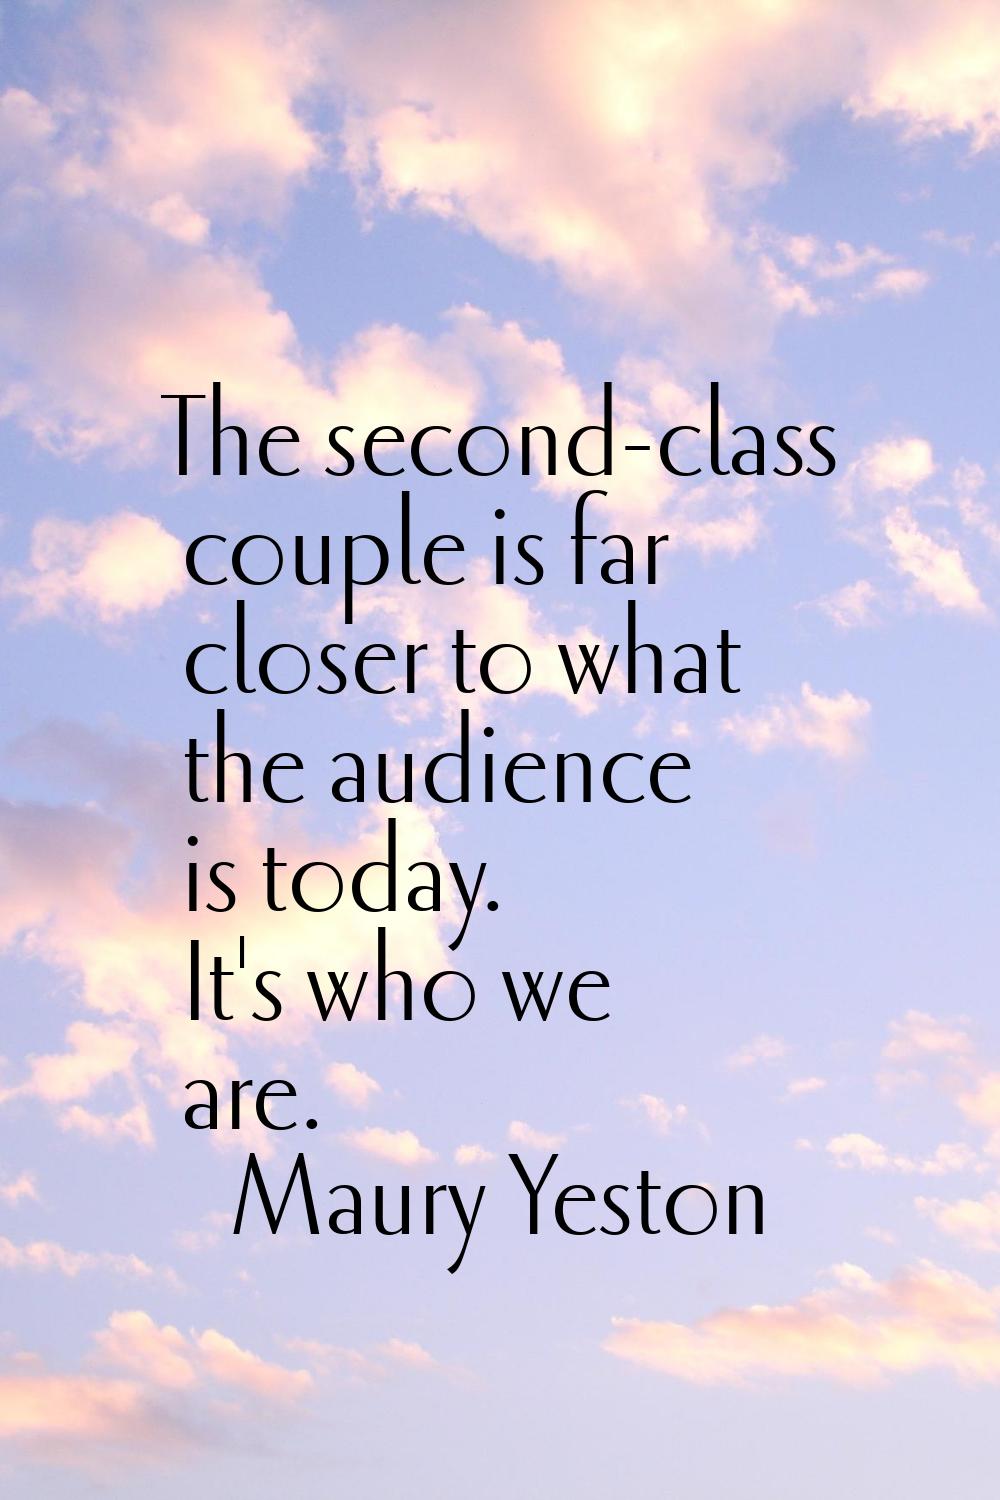 The second-class couple is far closer to what the audience is today. It's who we are.